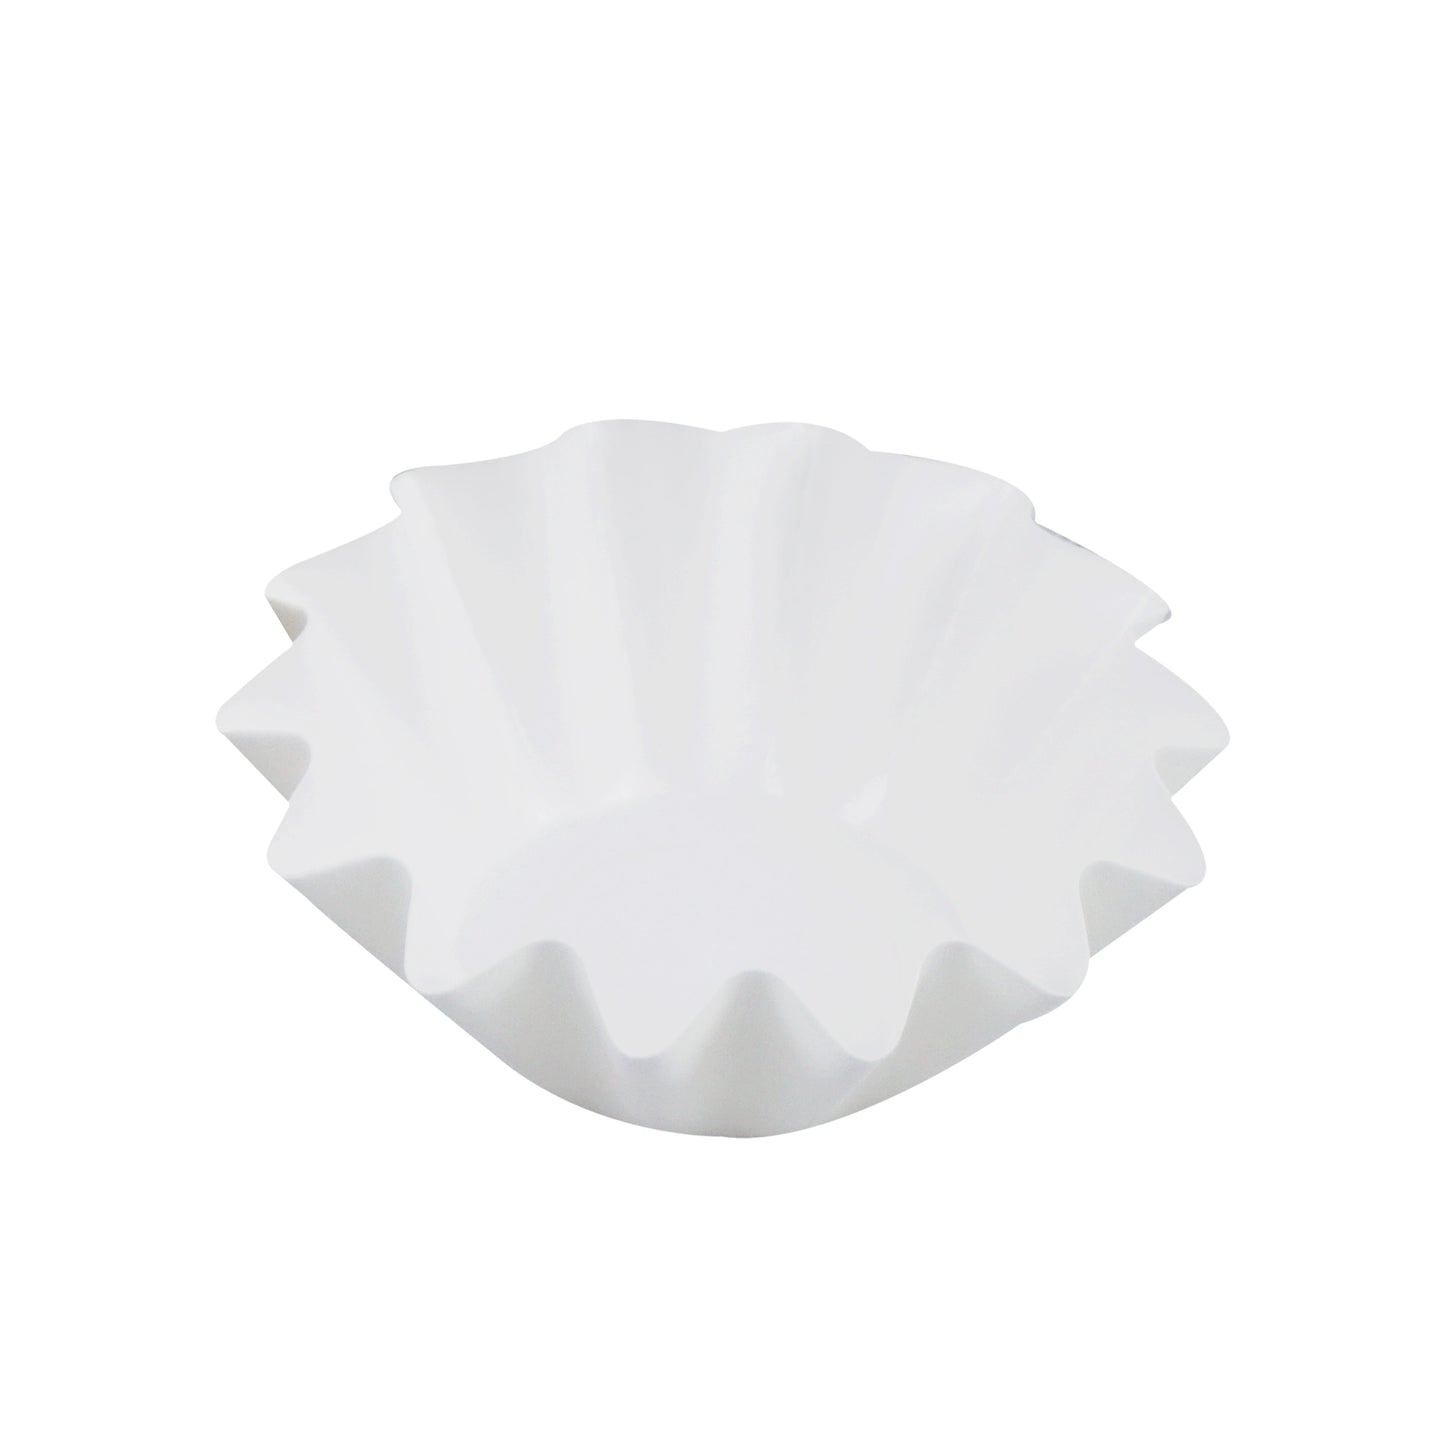 White Floret Card Paper Baking Cupcake Muffin Liners, Wrappers 50 Pcs